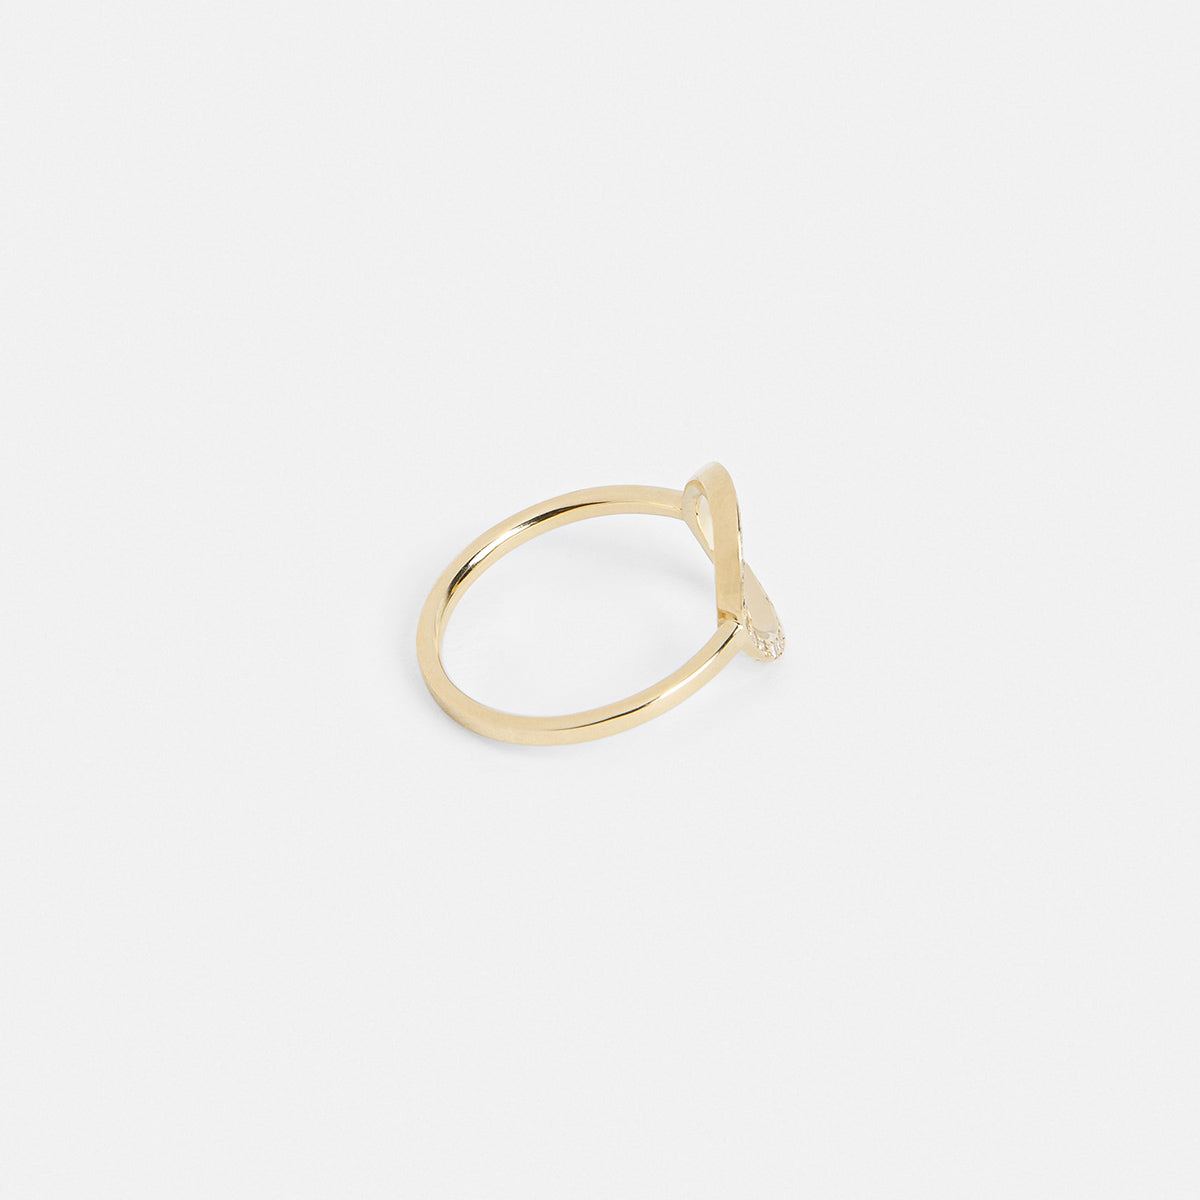 Nida Delicate Ring in 14k Gold set with White Diamonds by SHW Fine Jewelry